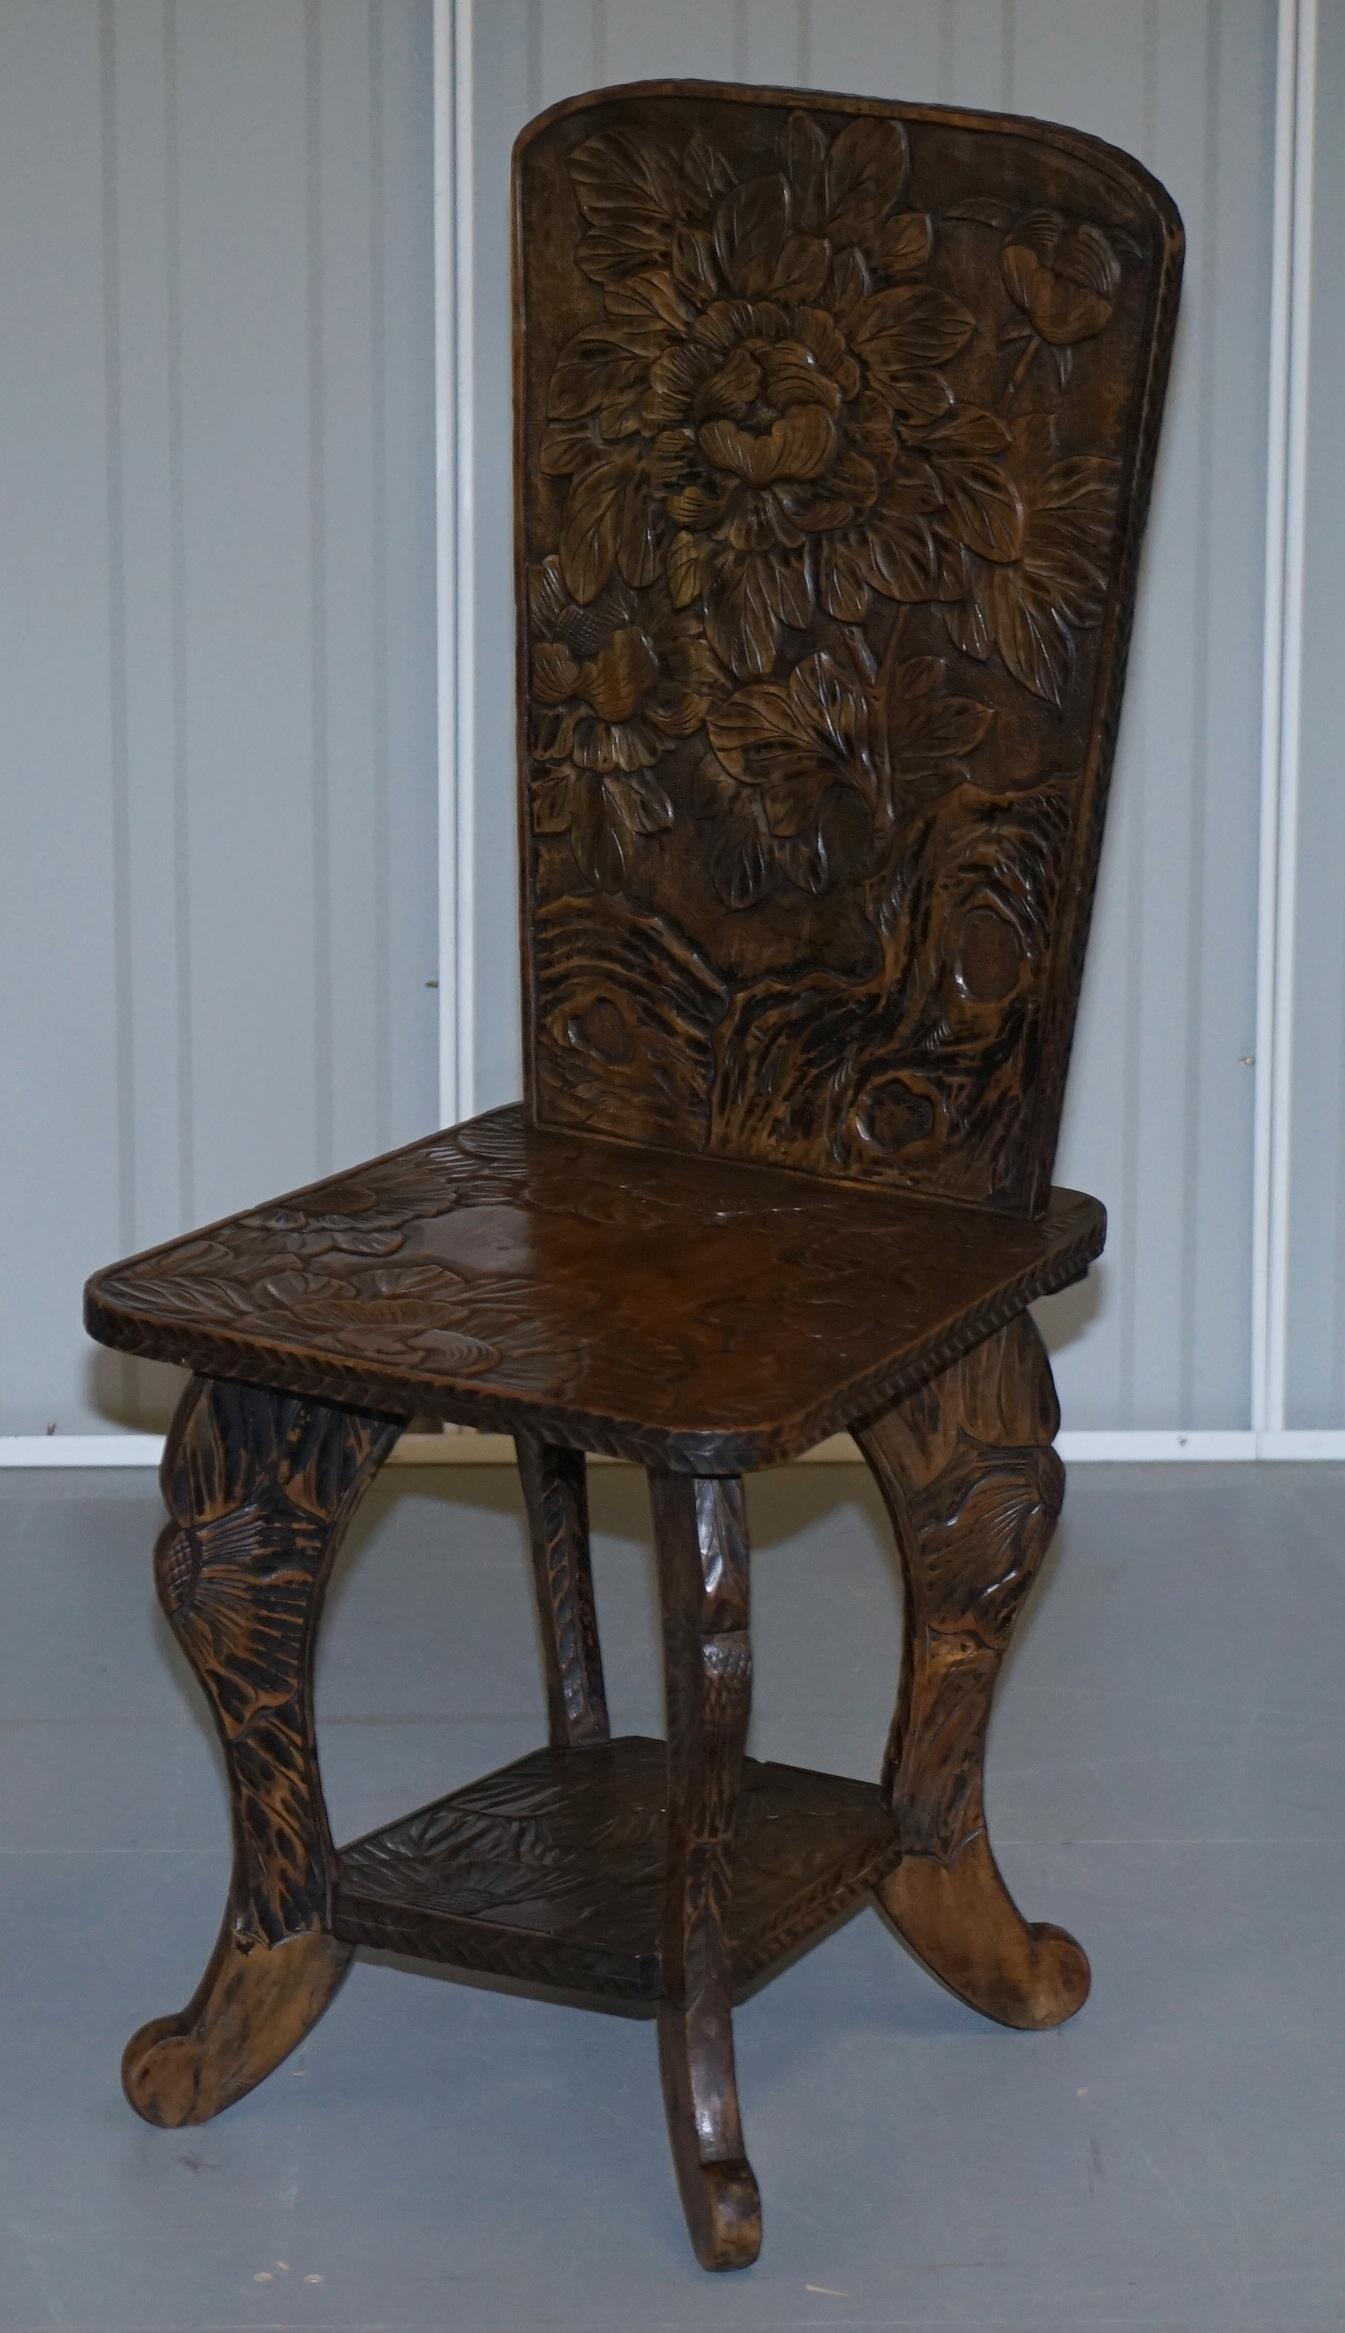 Chinese Very Rare Original Liberty's London Signed Qing Dynasty Chair Floral Carving For Sale